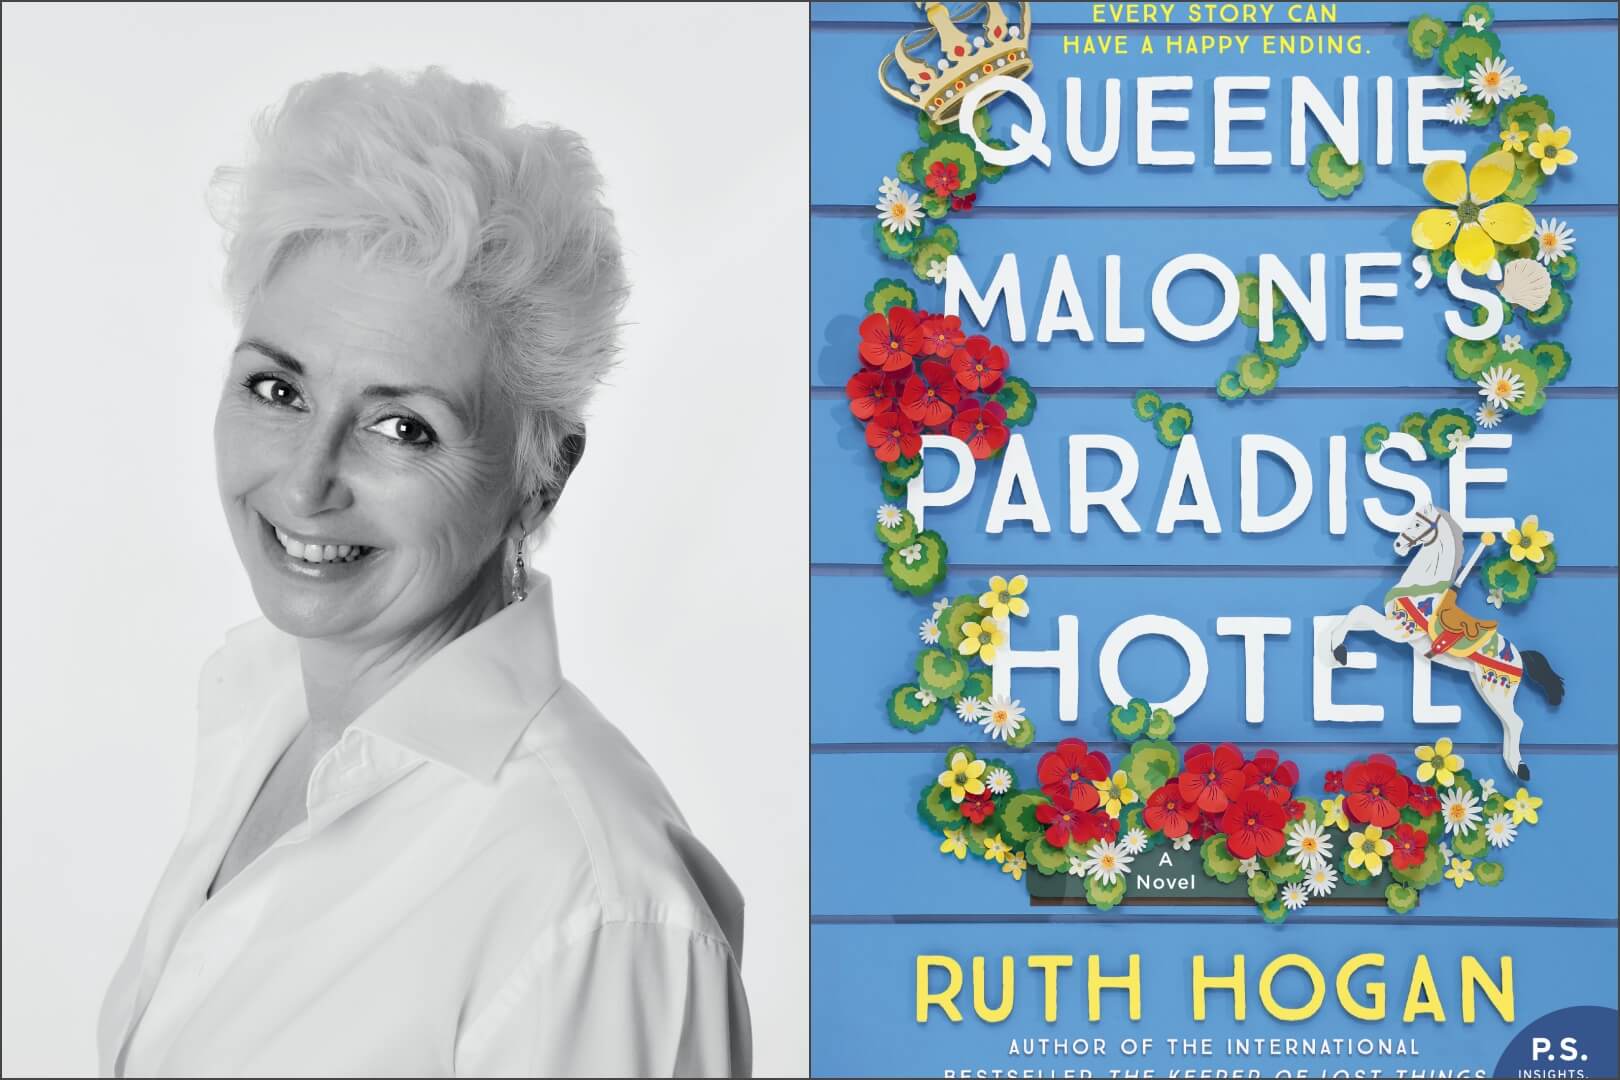 Q&A with Ruth Hogan, Author of Queenie Malone’s Paradise Hotel